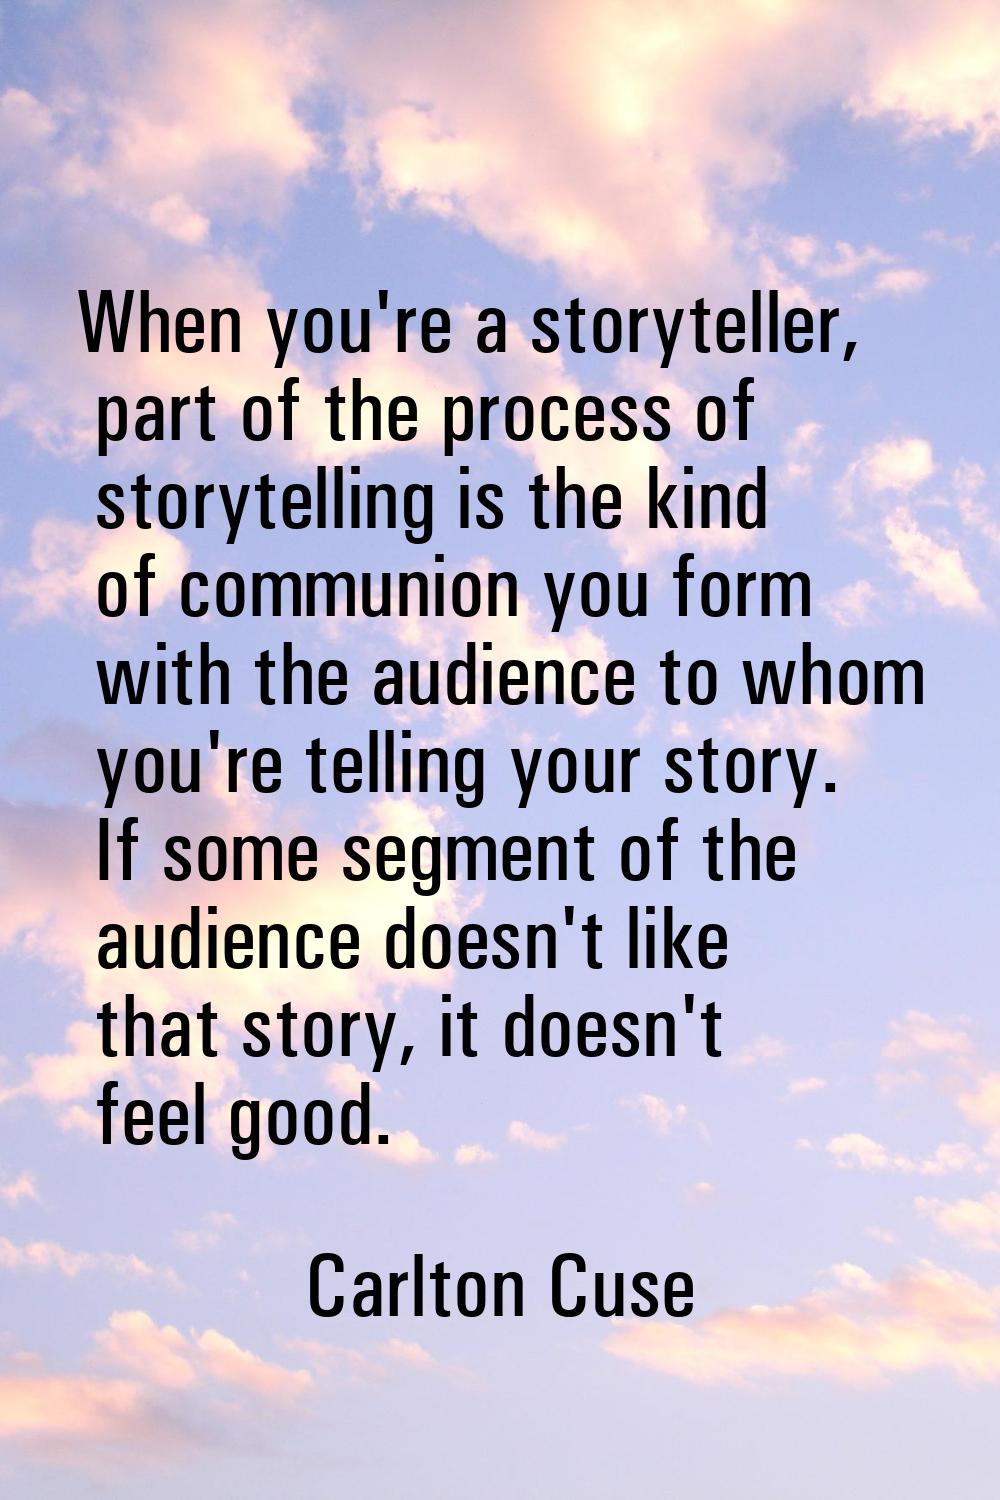 When you're a storyteller, part of the process of storytelling is the kind of communion you form wi